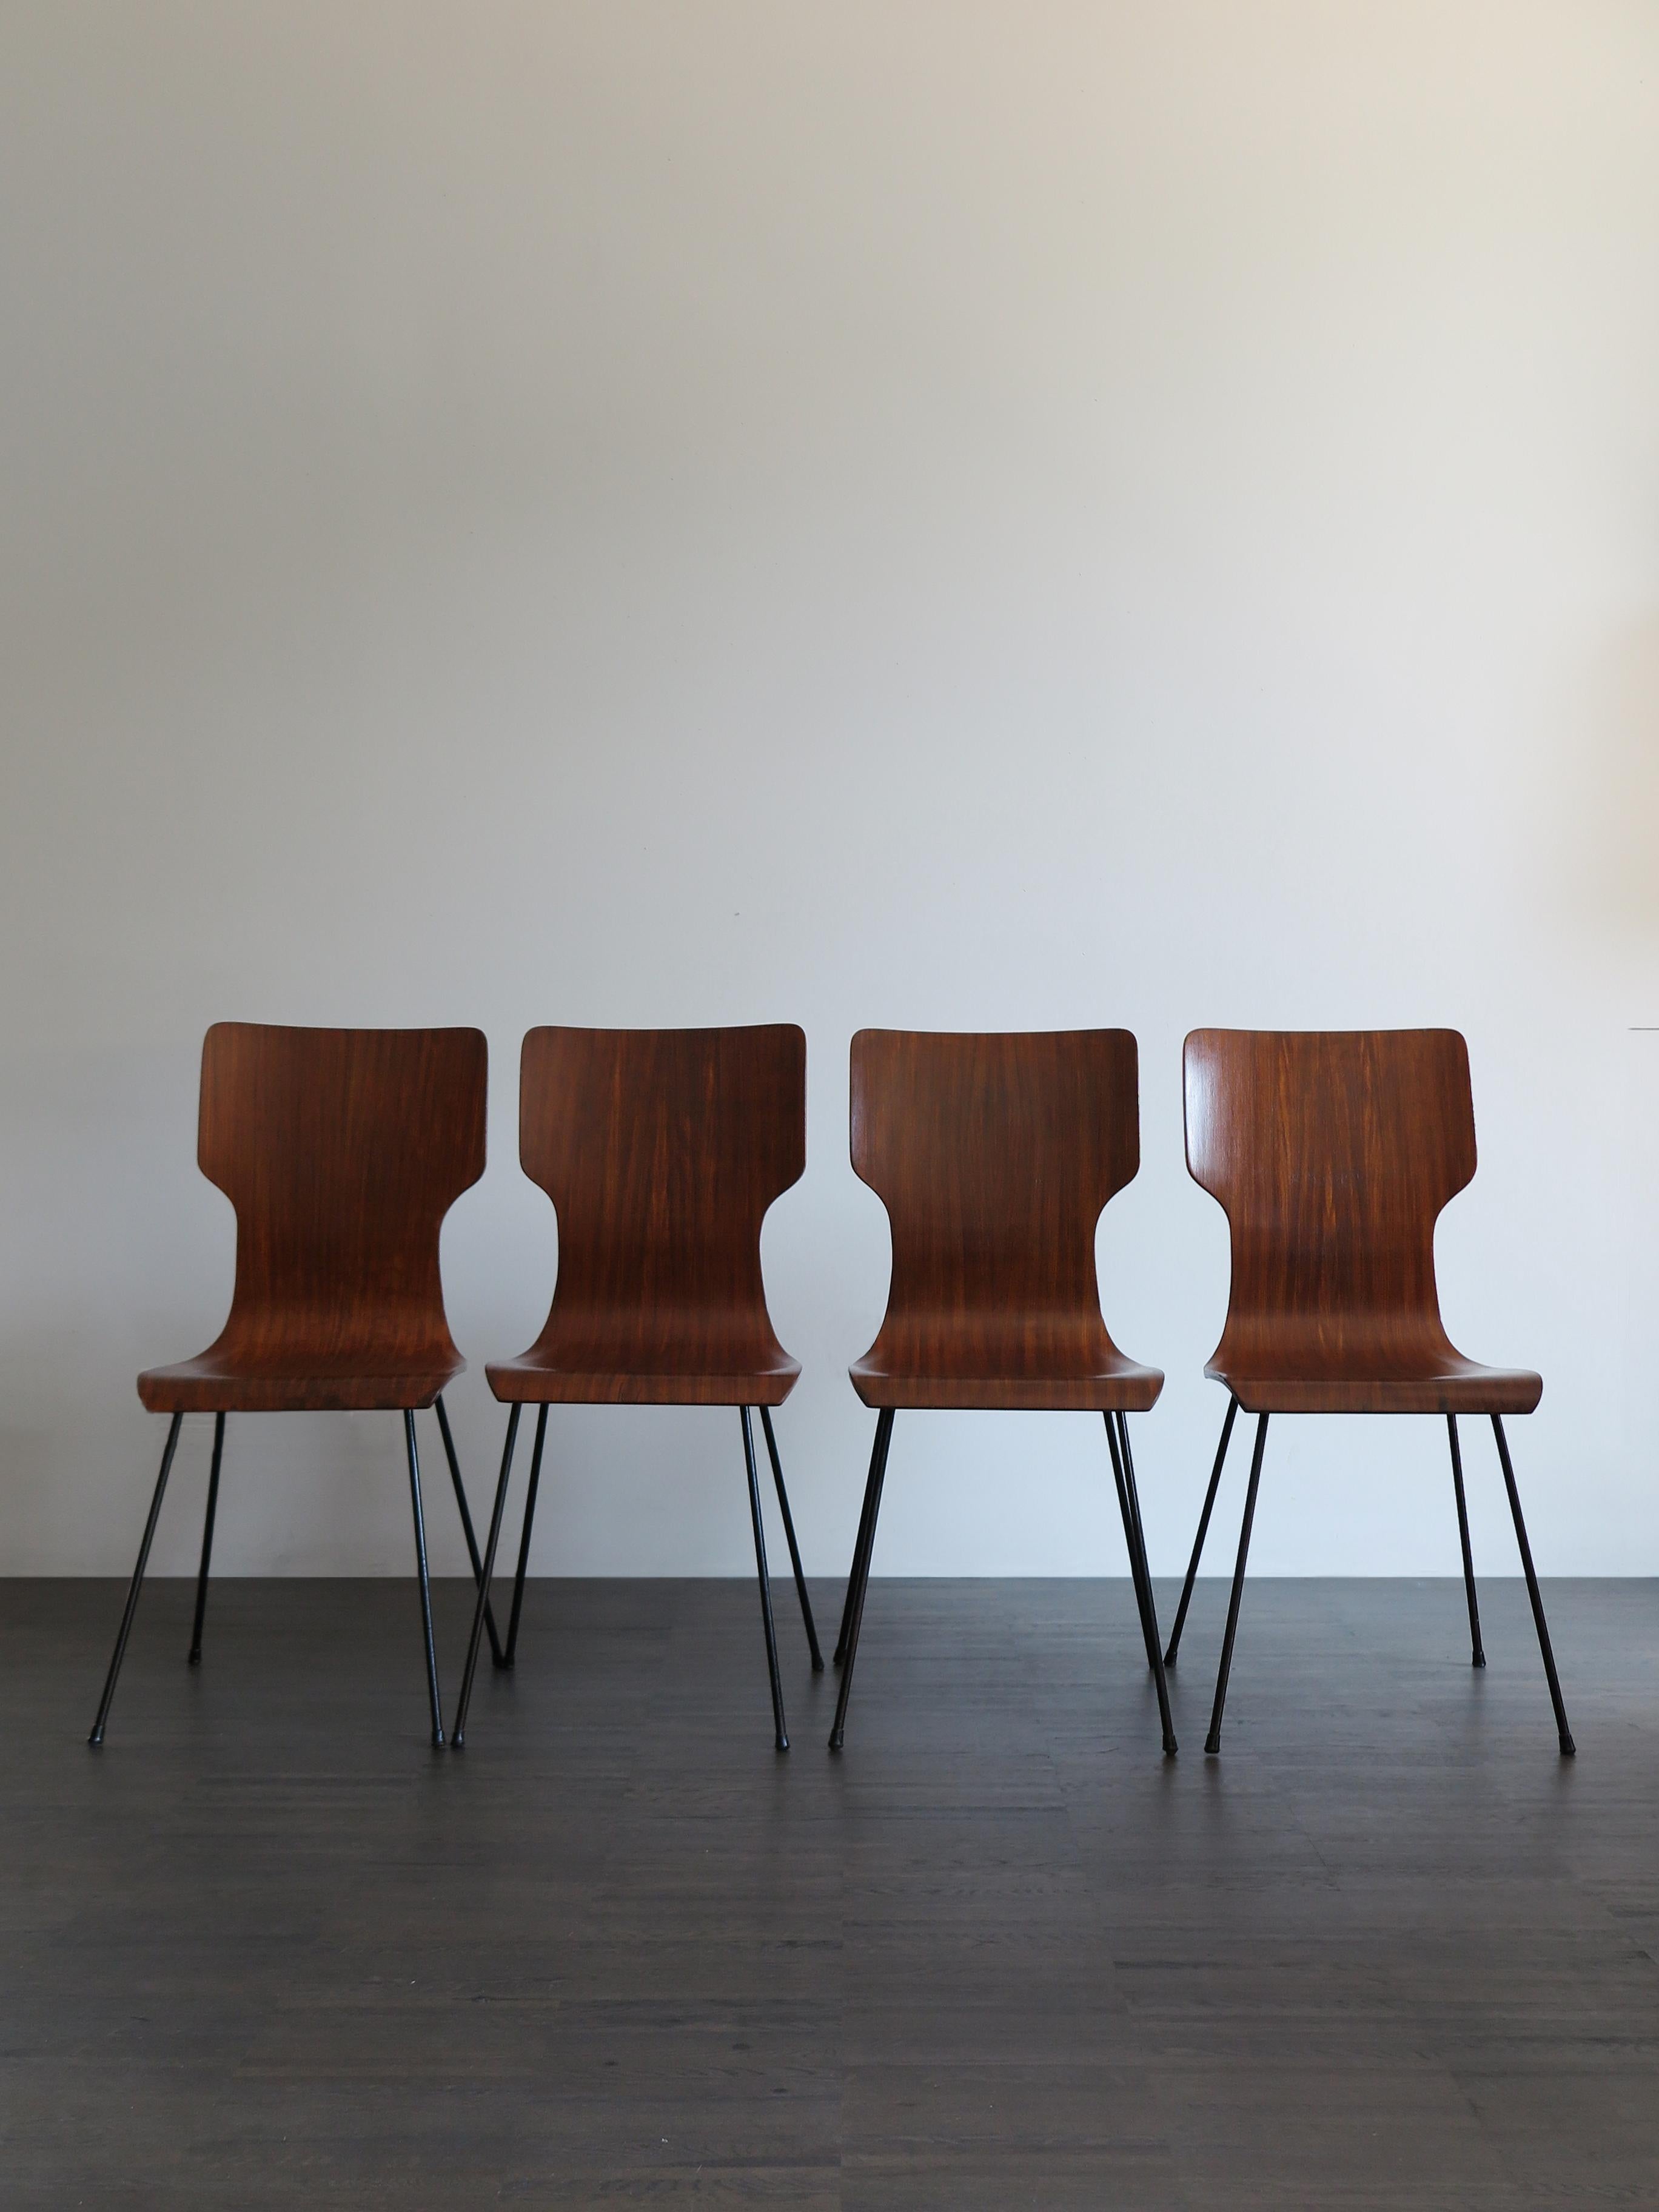 Italian midcentury modern dining chairs designed by Carlo Ratti with black painted metal structure and hot curved plywood shell.
Some signs due to normal use over time.